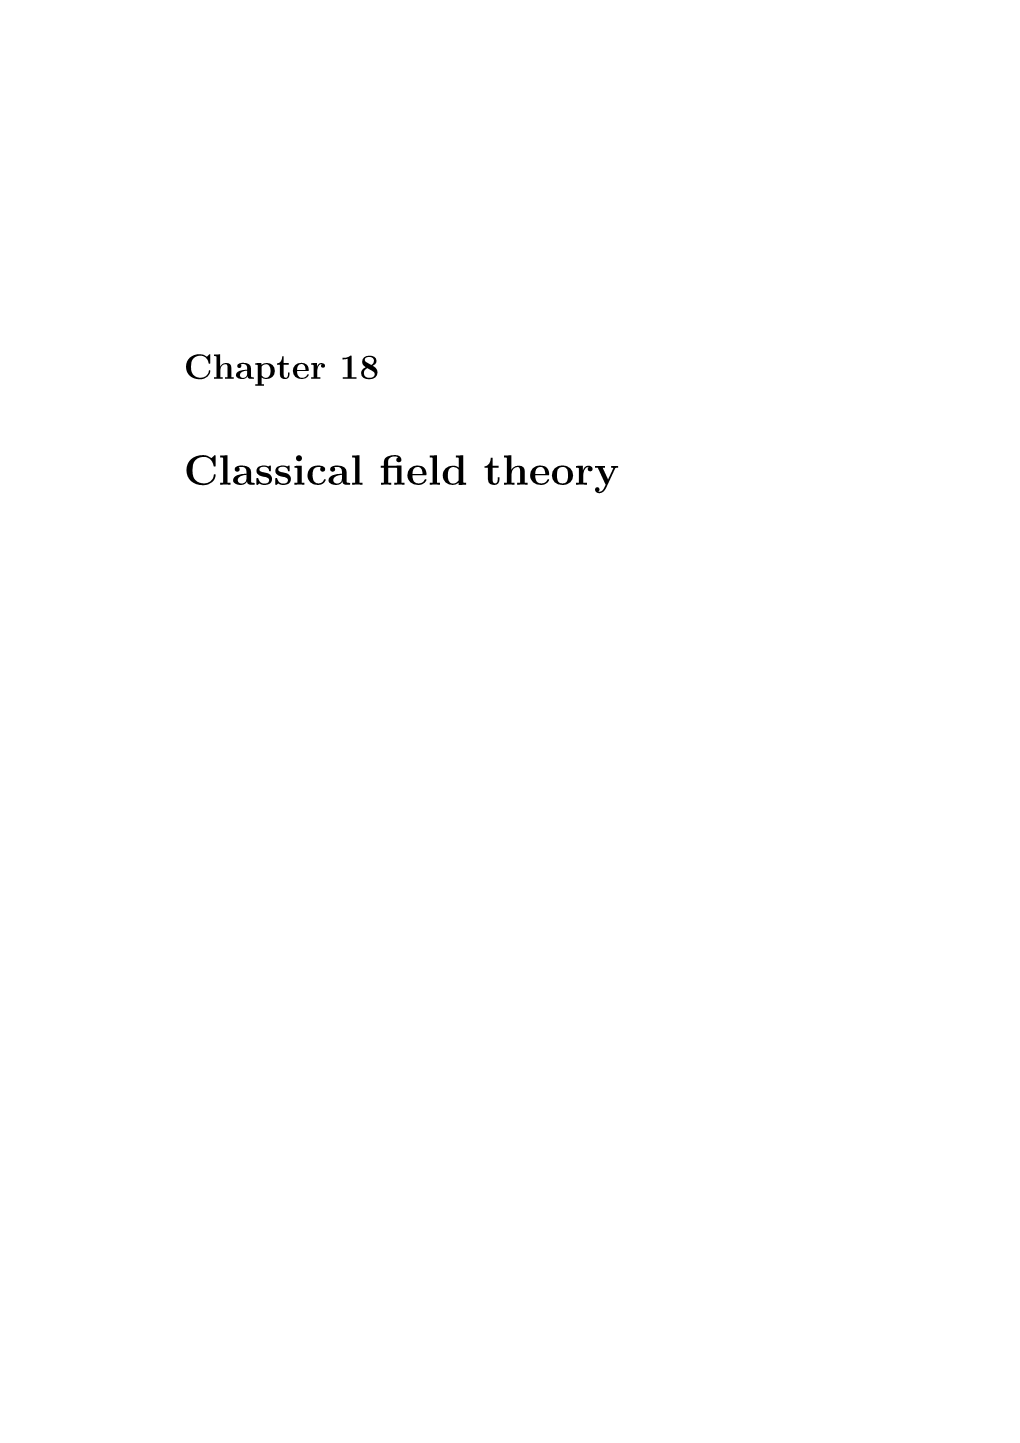 Classical Field Theory